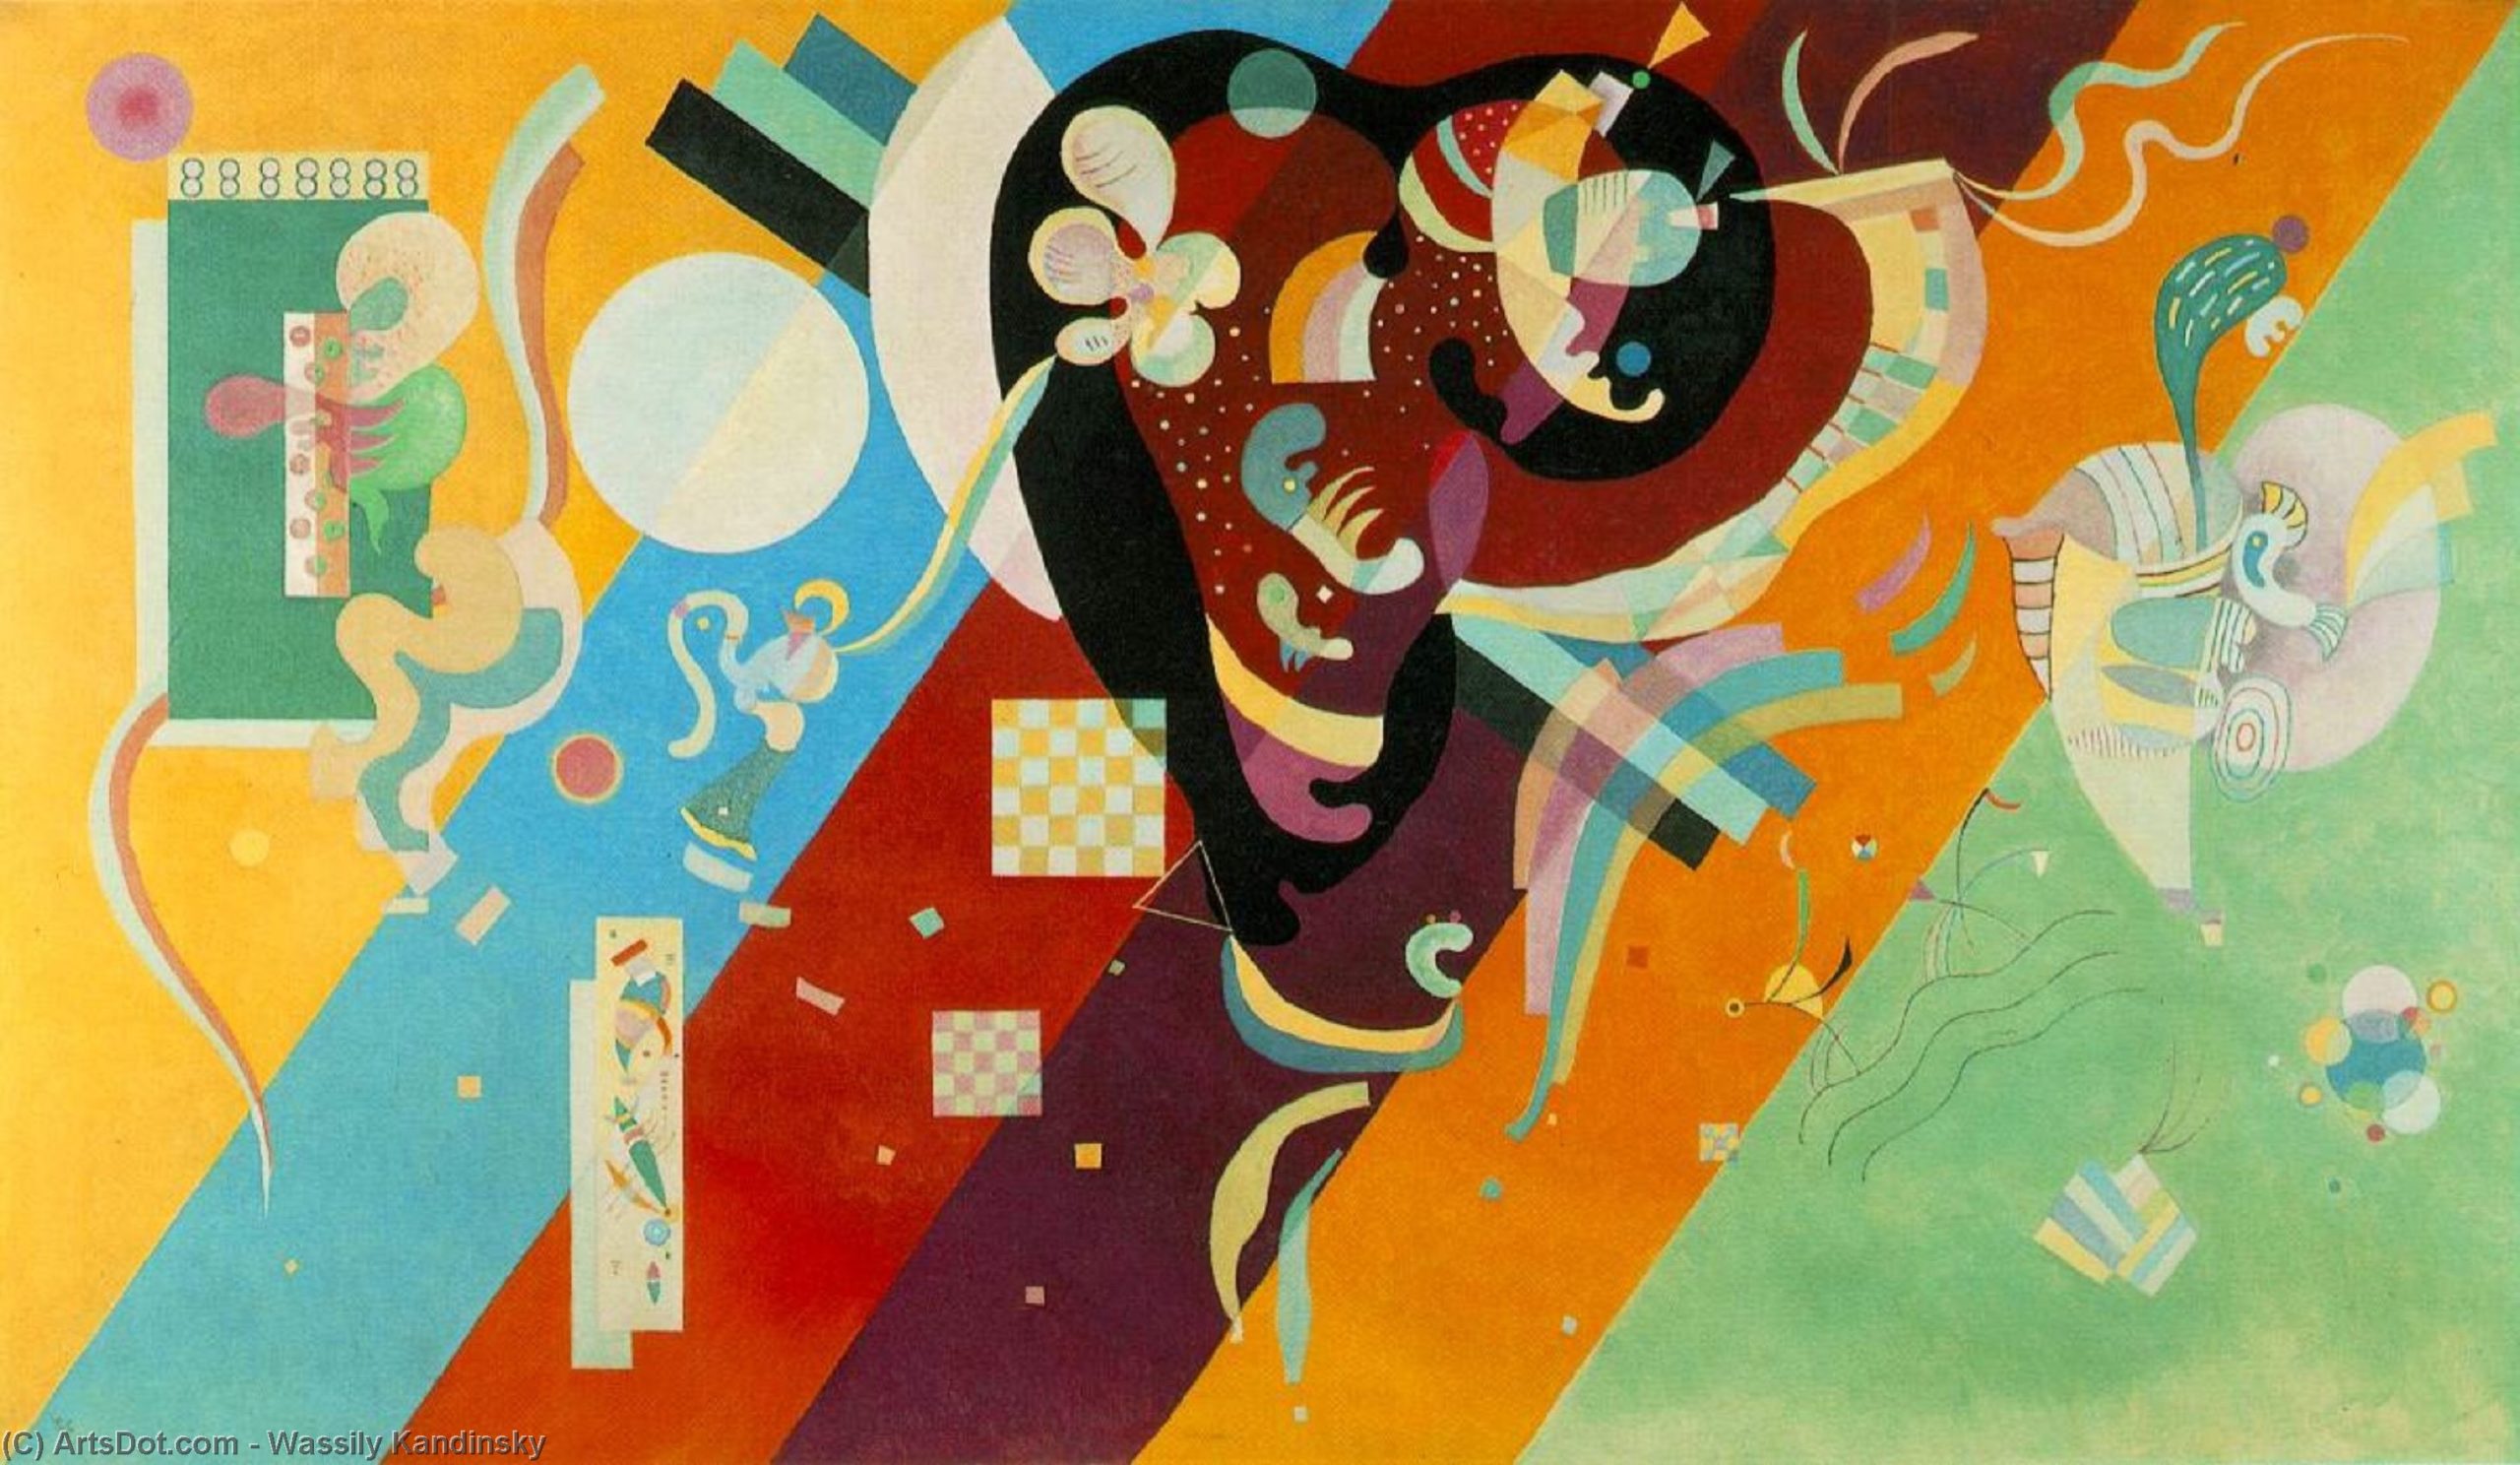 Wassily Kandinsky, Composition IX, 1929. (Public Domain, Source: Wikimedia Commons). According to Kant, intuitions of the mind structure our knowledge of the world.